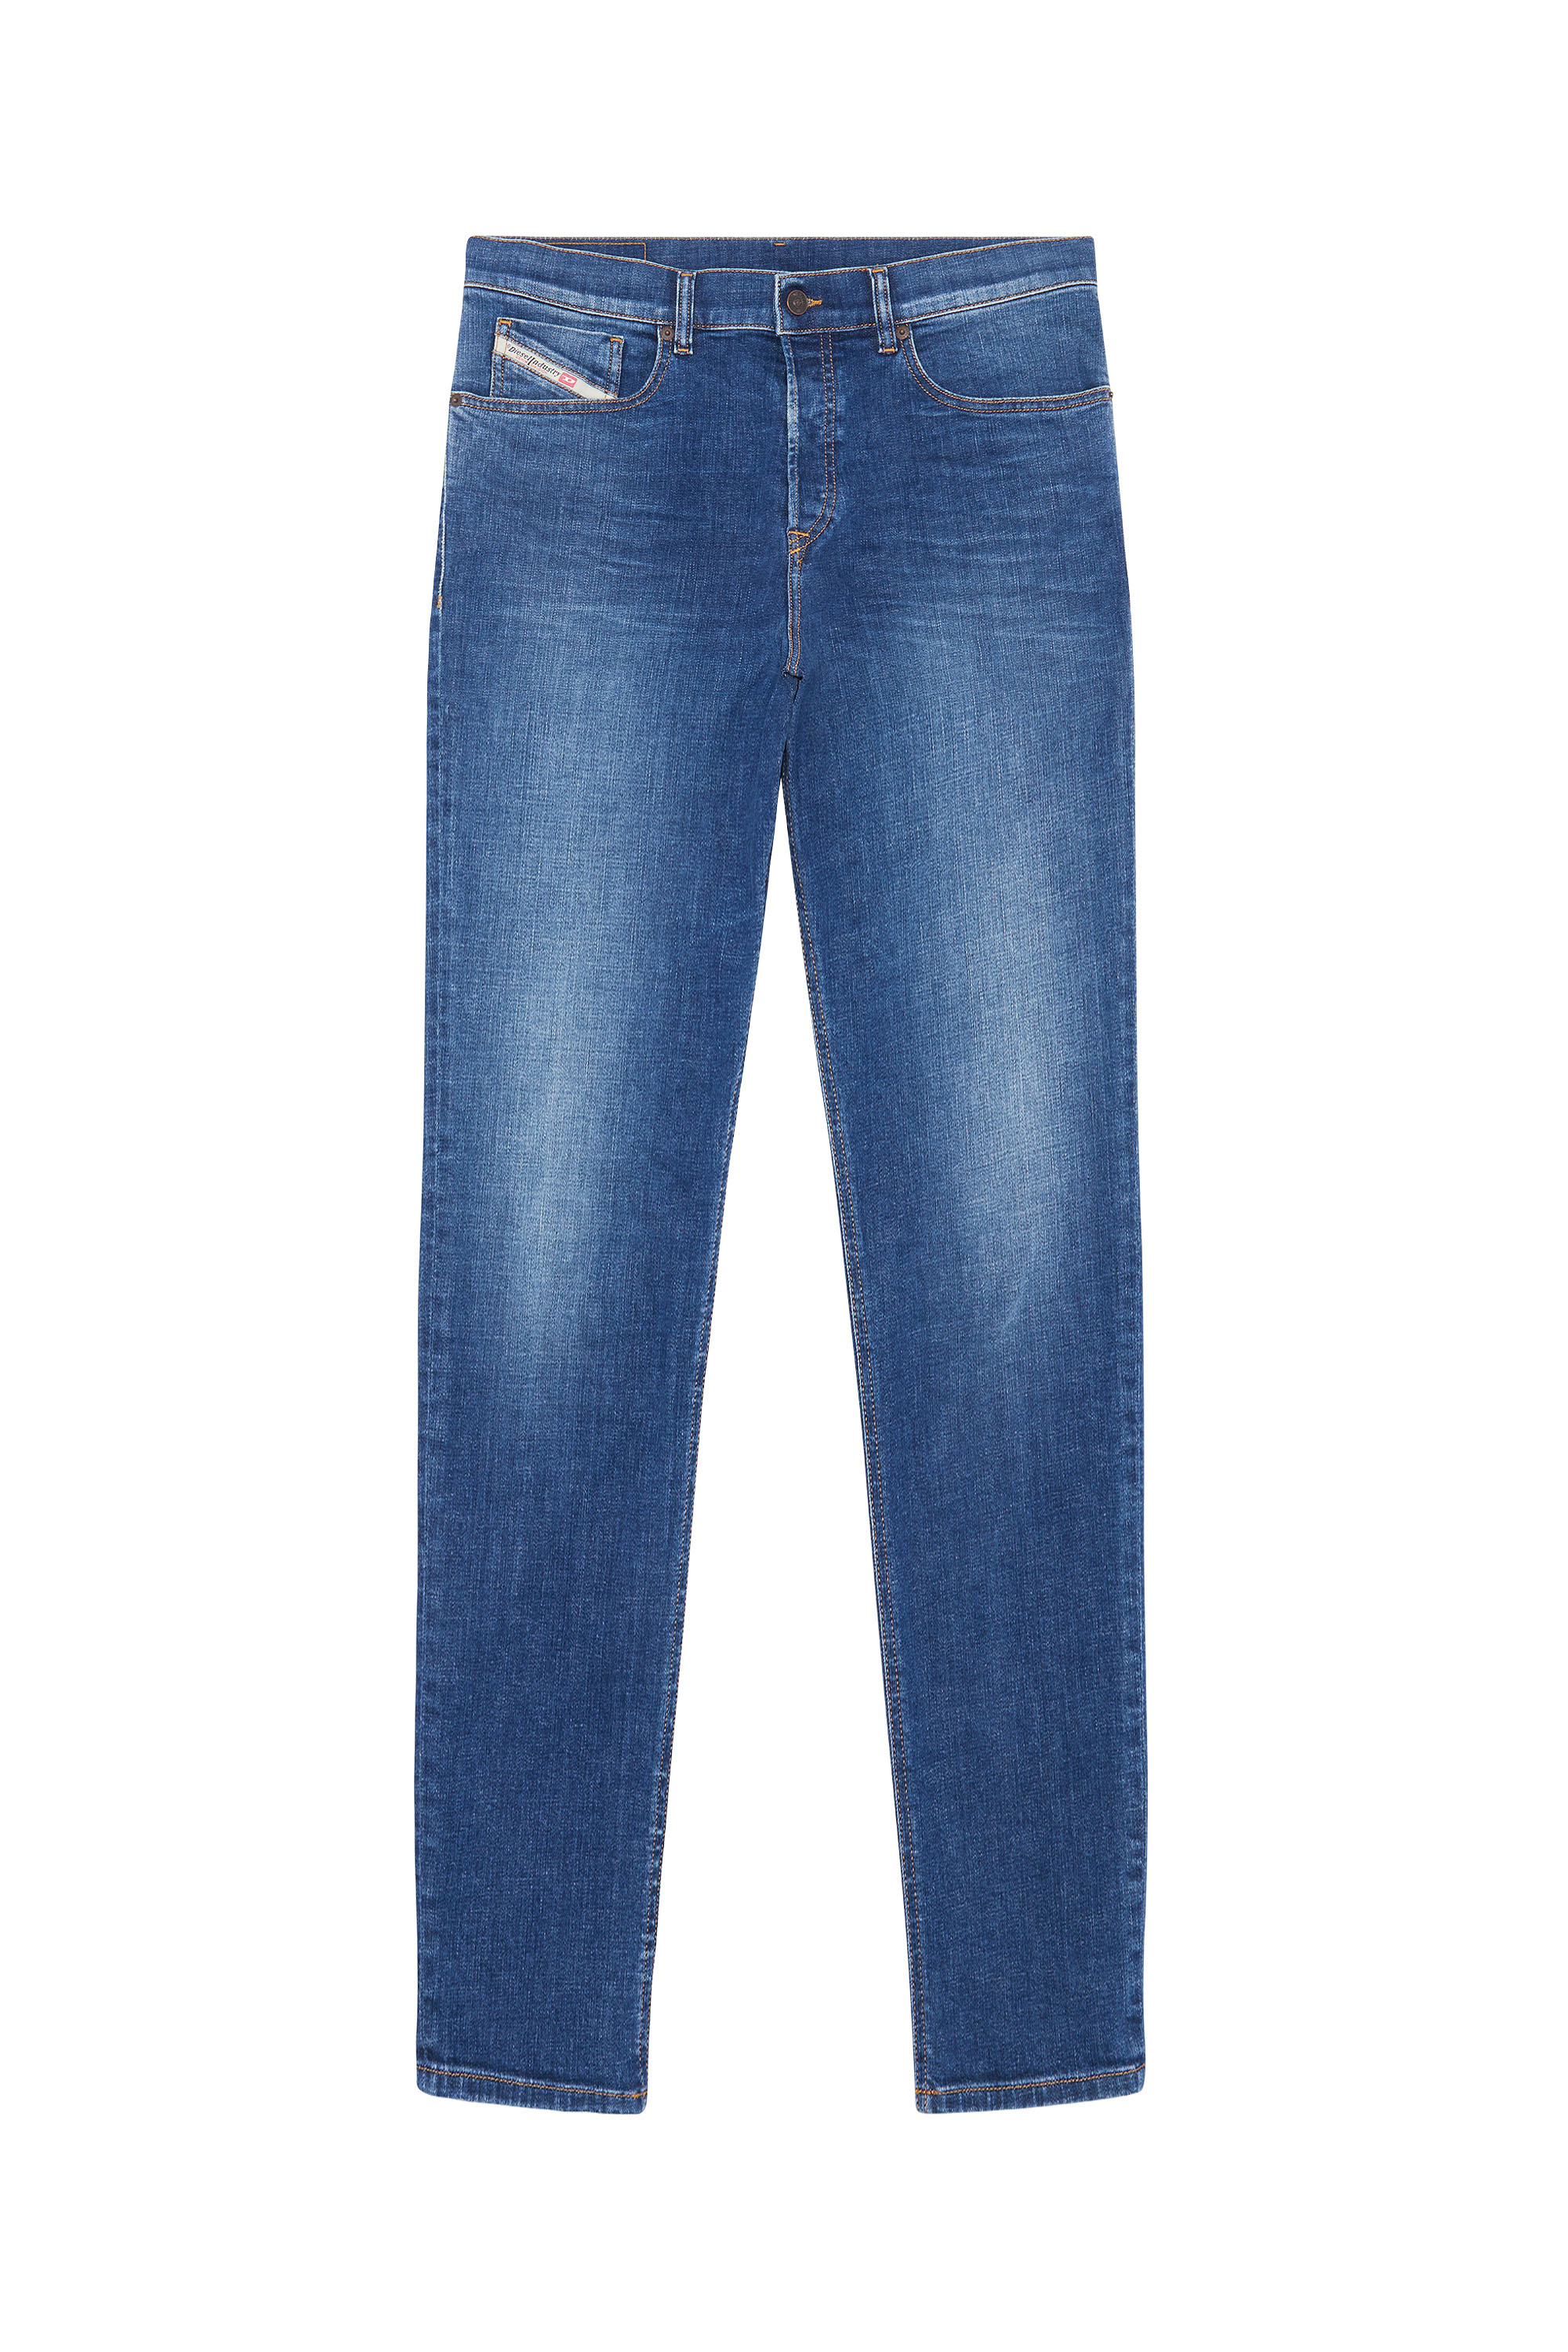 2005 D-FINING 09D46 Tapered Jeans, Dark Blue - Jeans